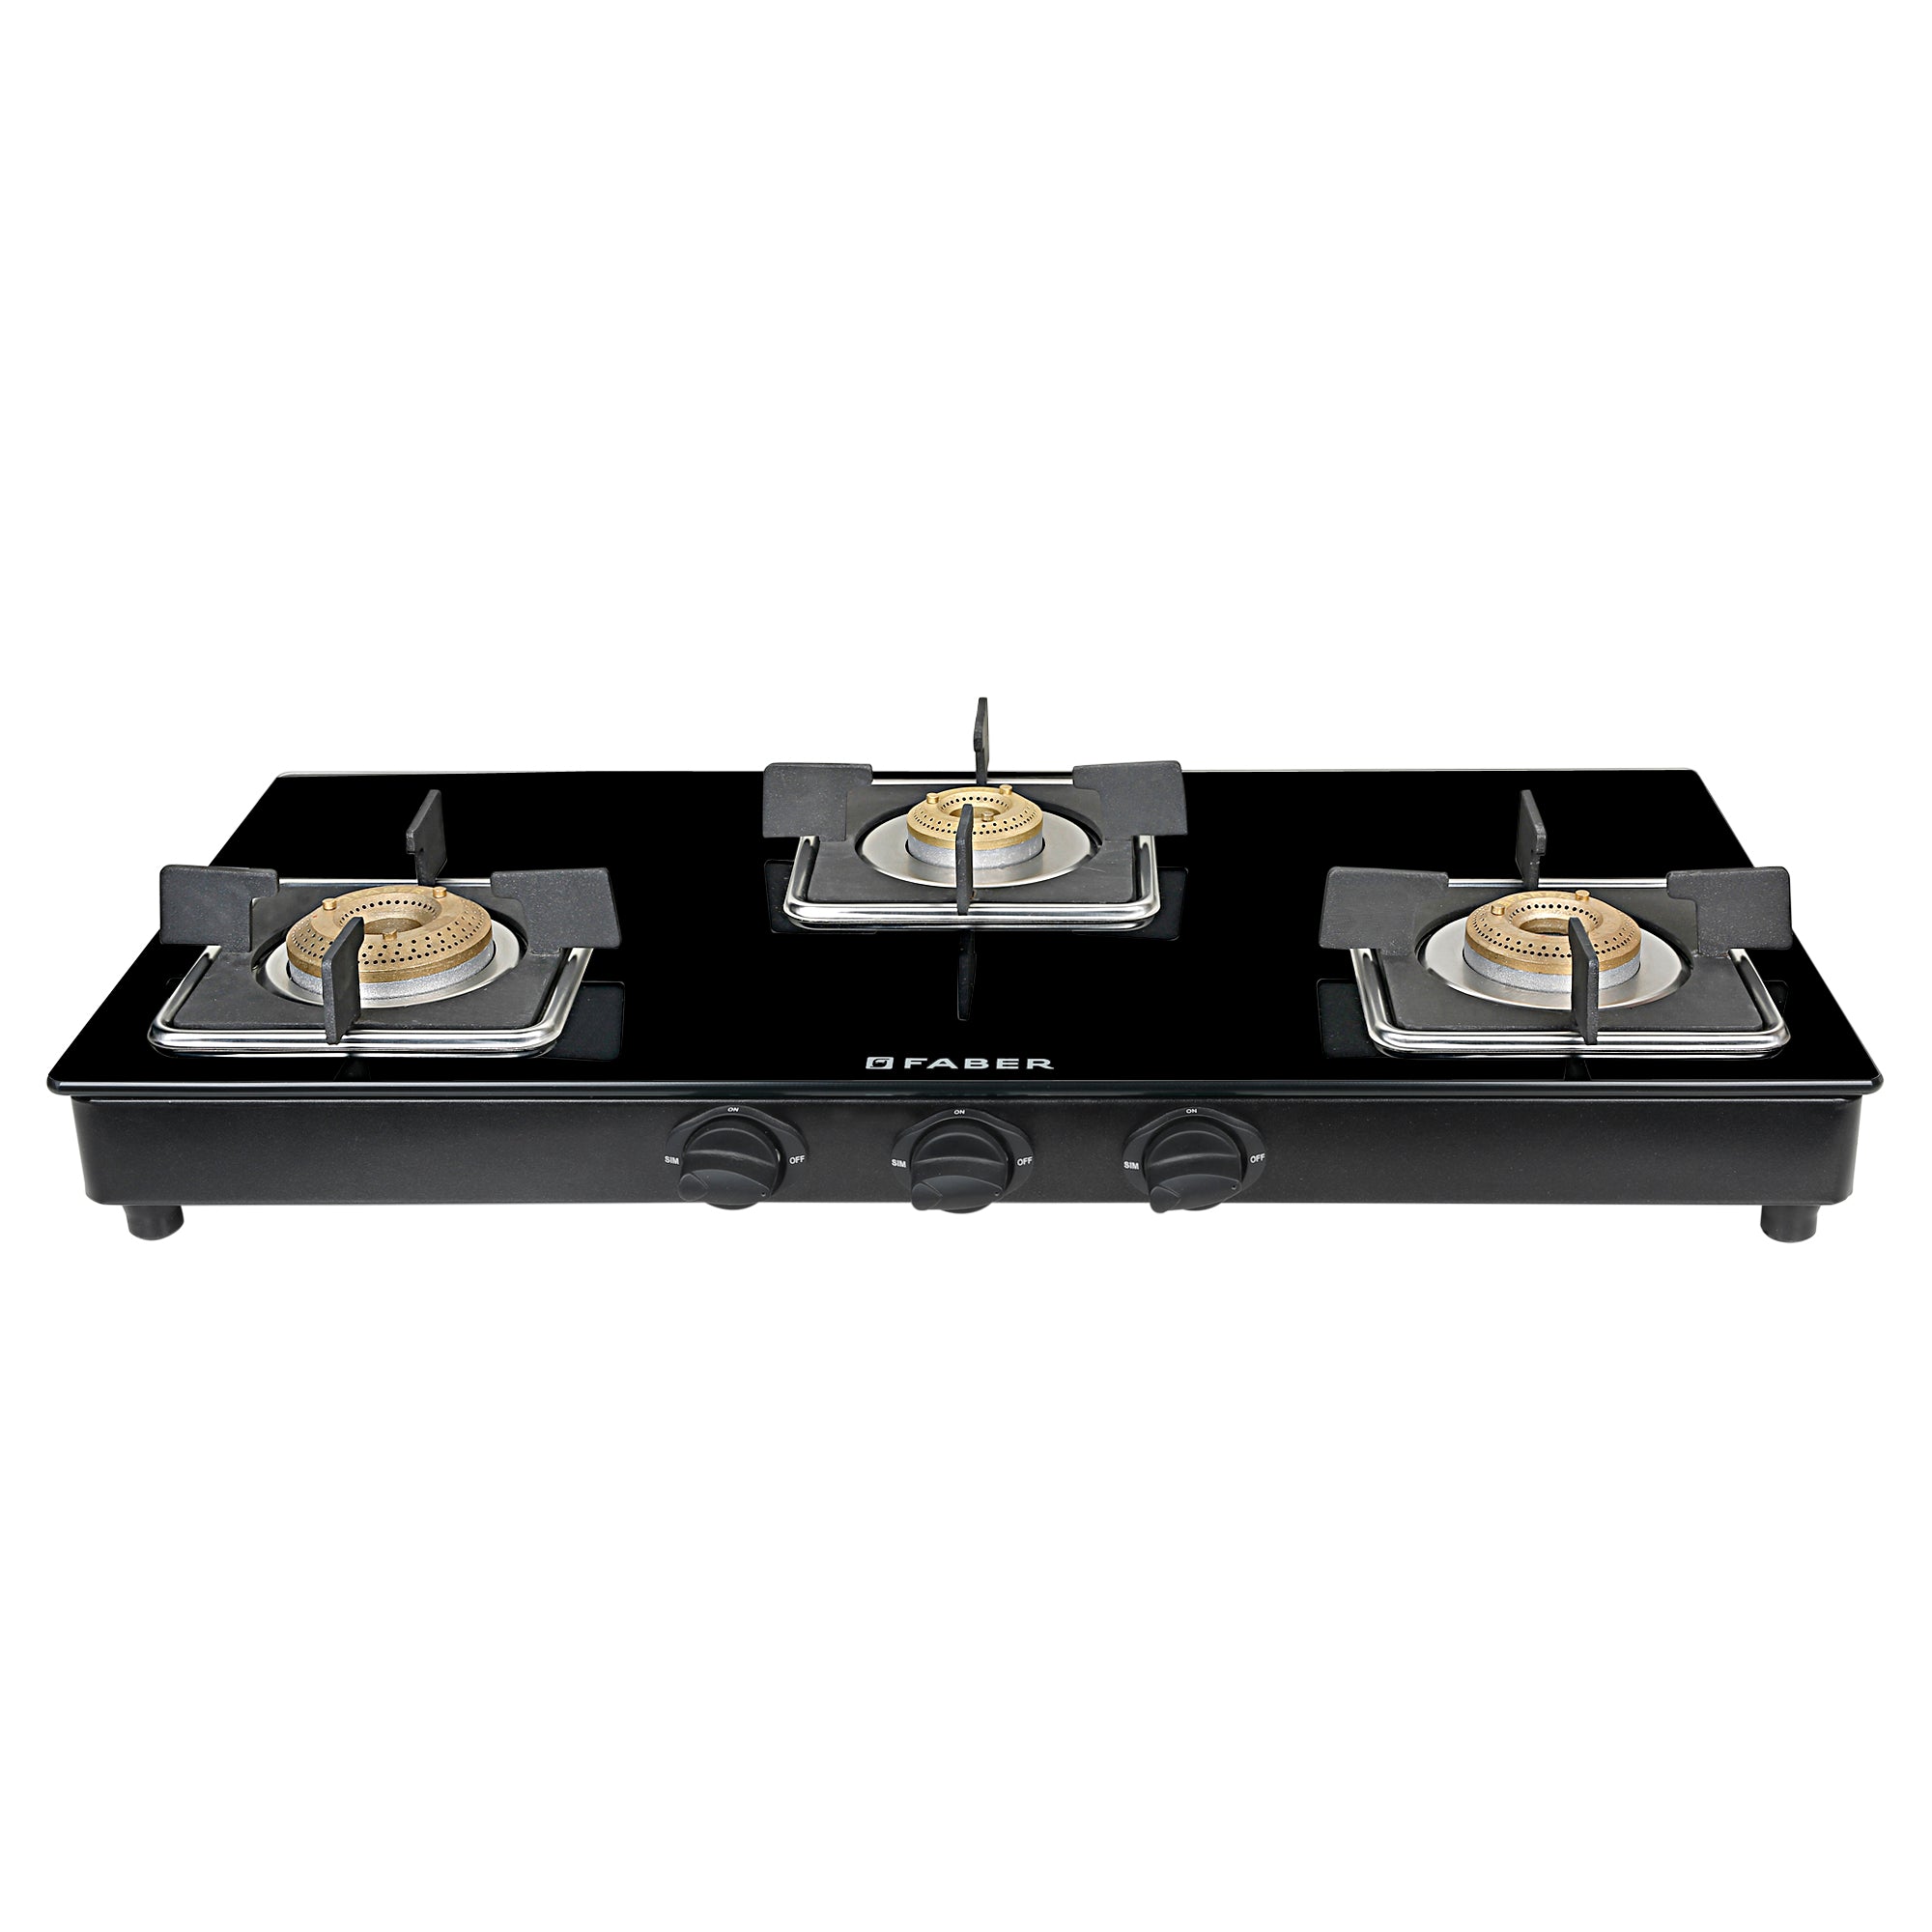 Three Burner Glass Top Stoves - Glass Cook Top Pearl Digital Gas Stove SU-3B-355  Manufacturer from New Delhi